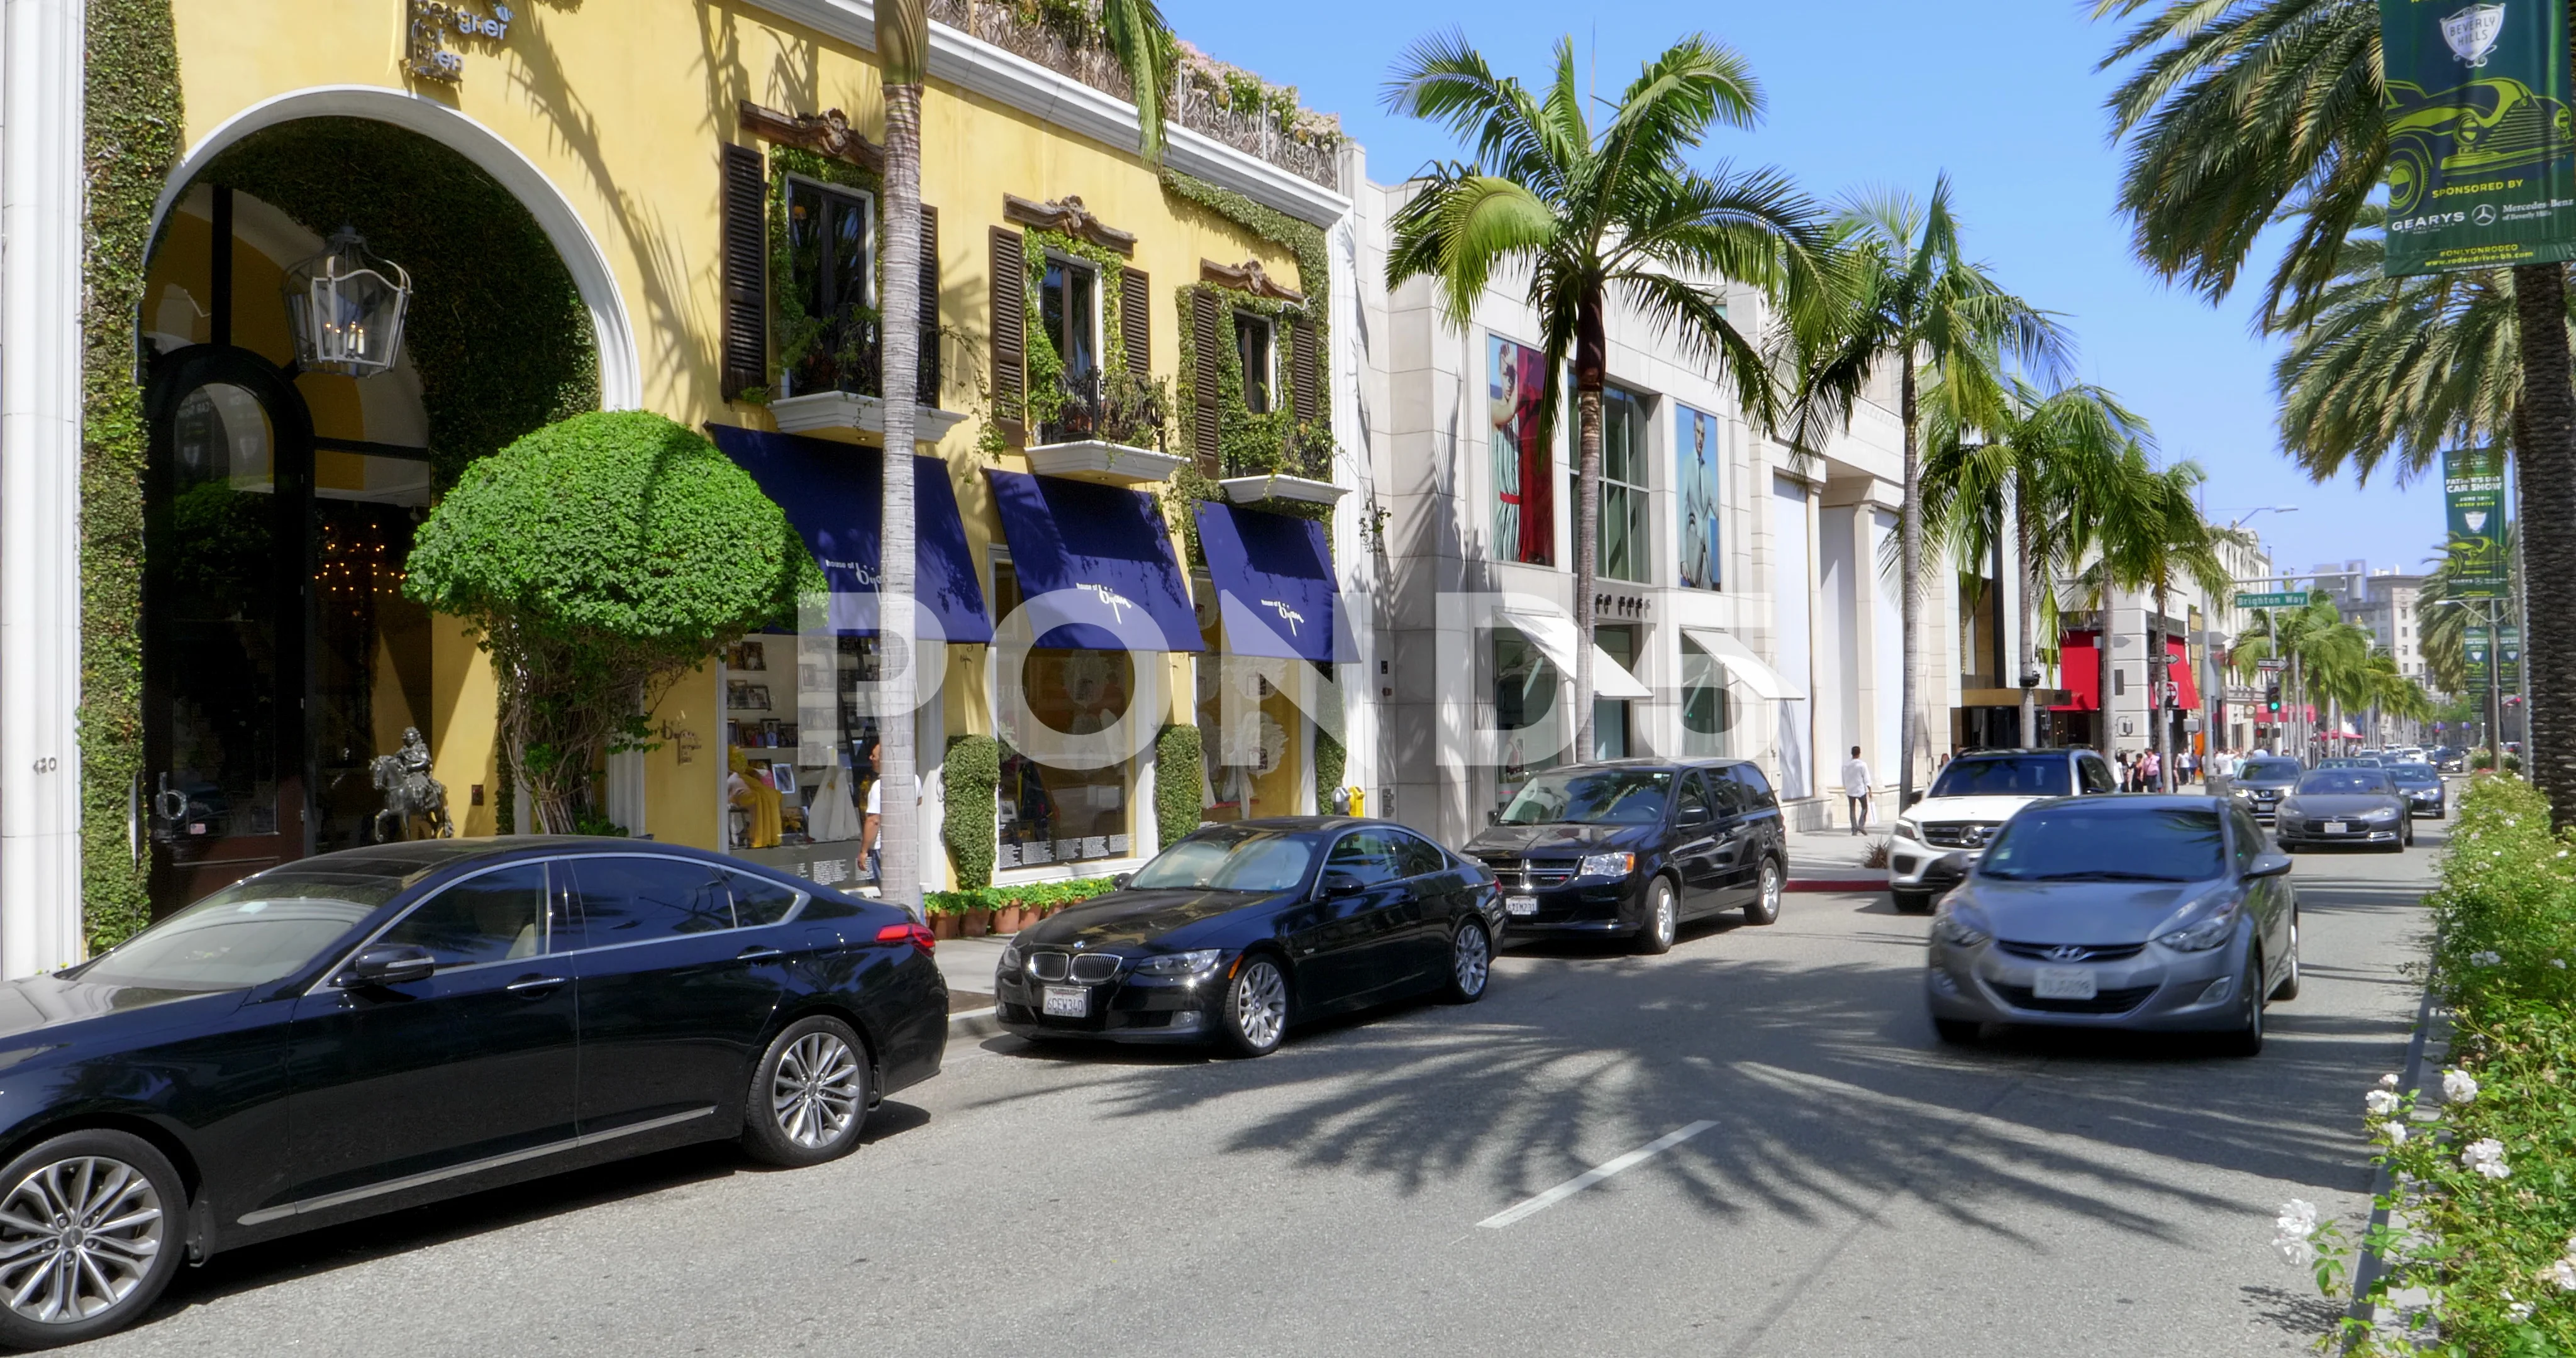 Luxury cars driving on Rodeo Drive in Be, Stock Video